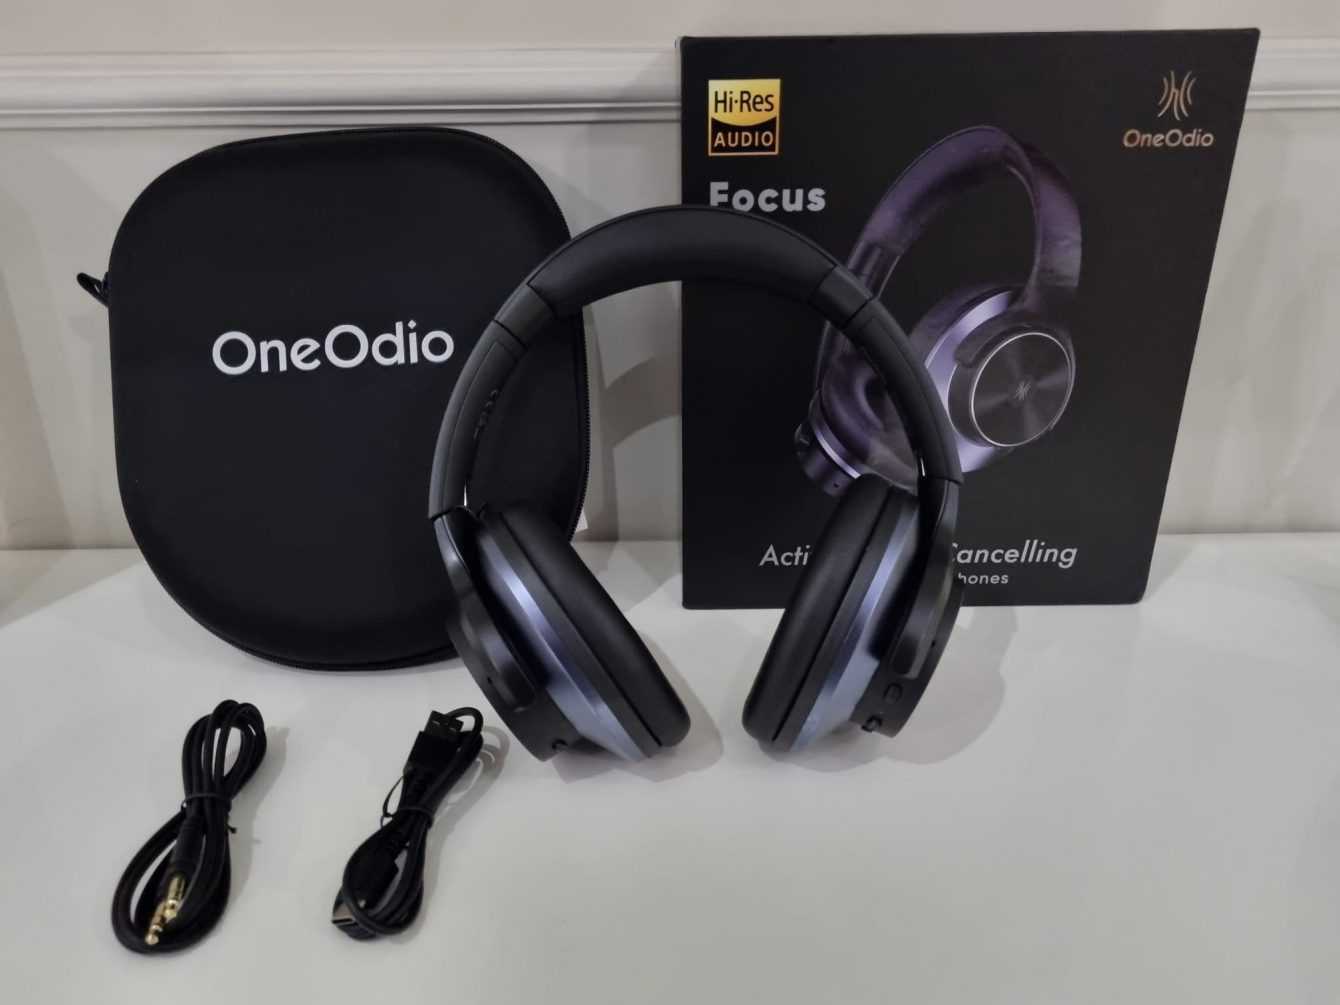 Focus A10 review: the novelty of OneOdio